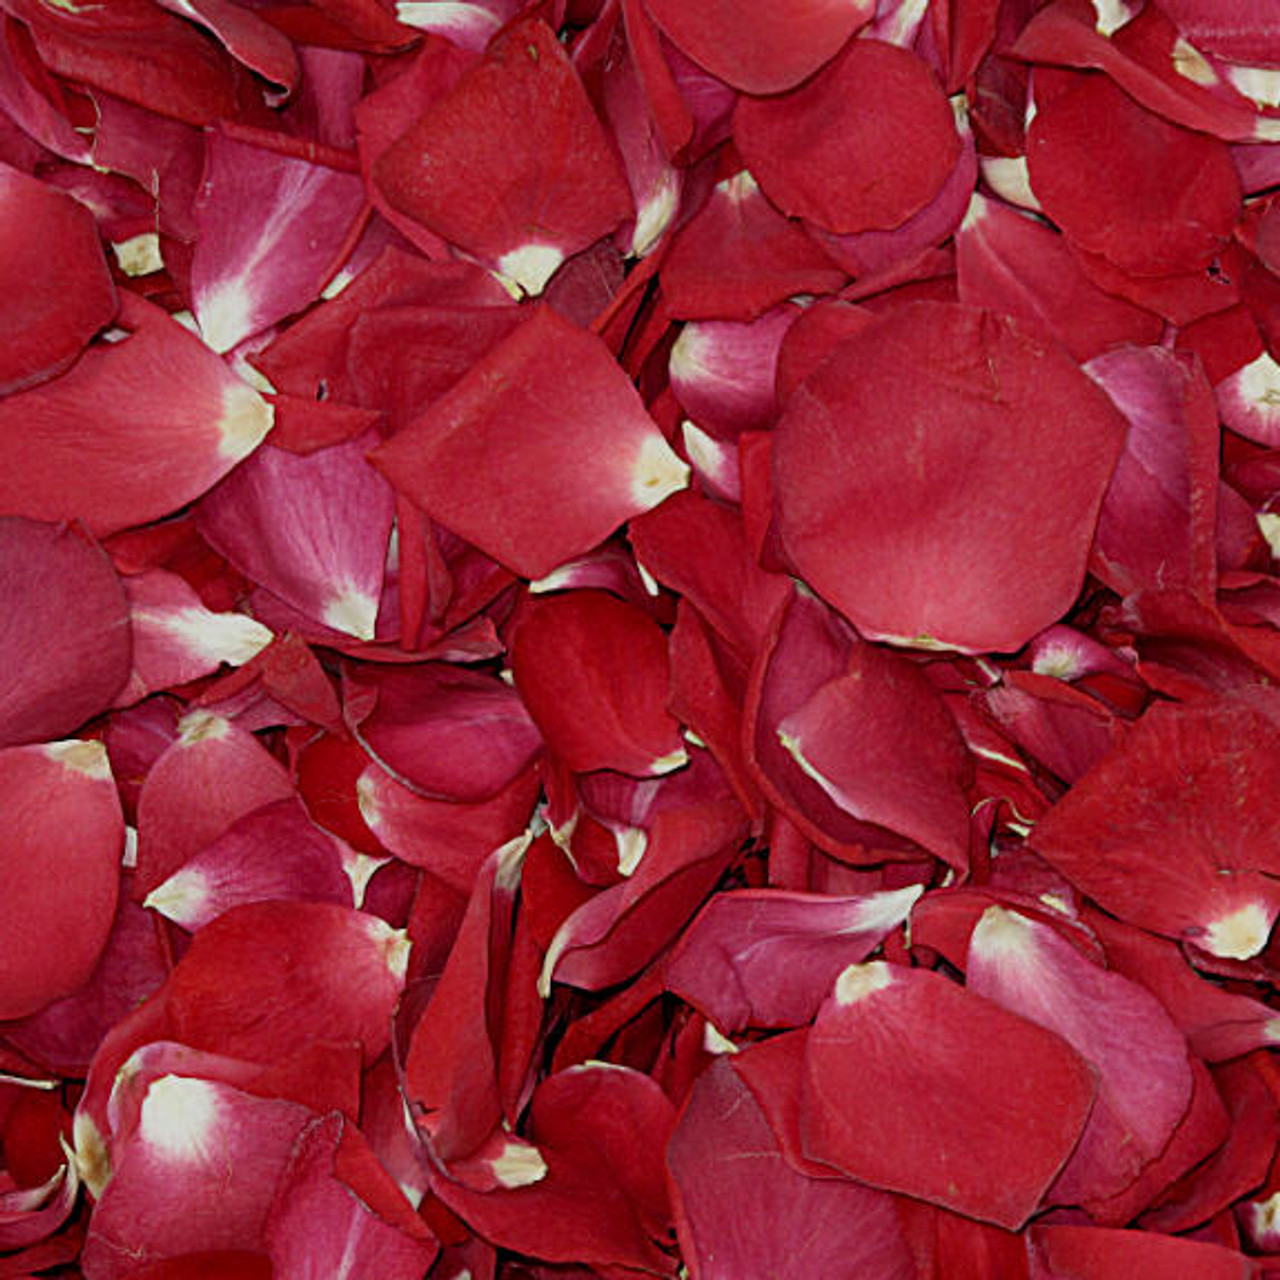 Rose petal decoration. Eco-friendly petals available at  www.flyboynaturals.com